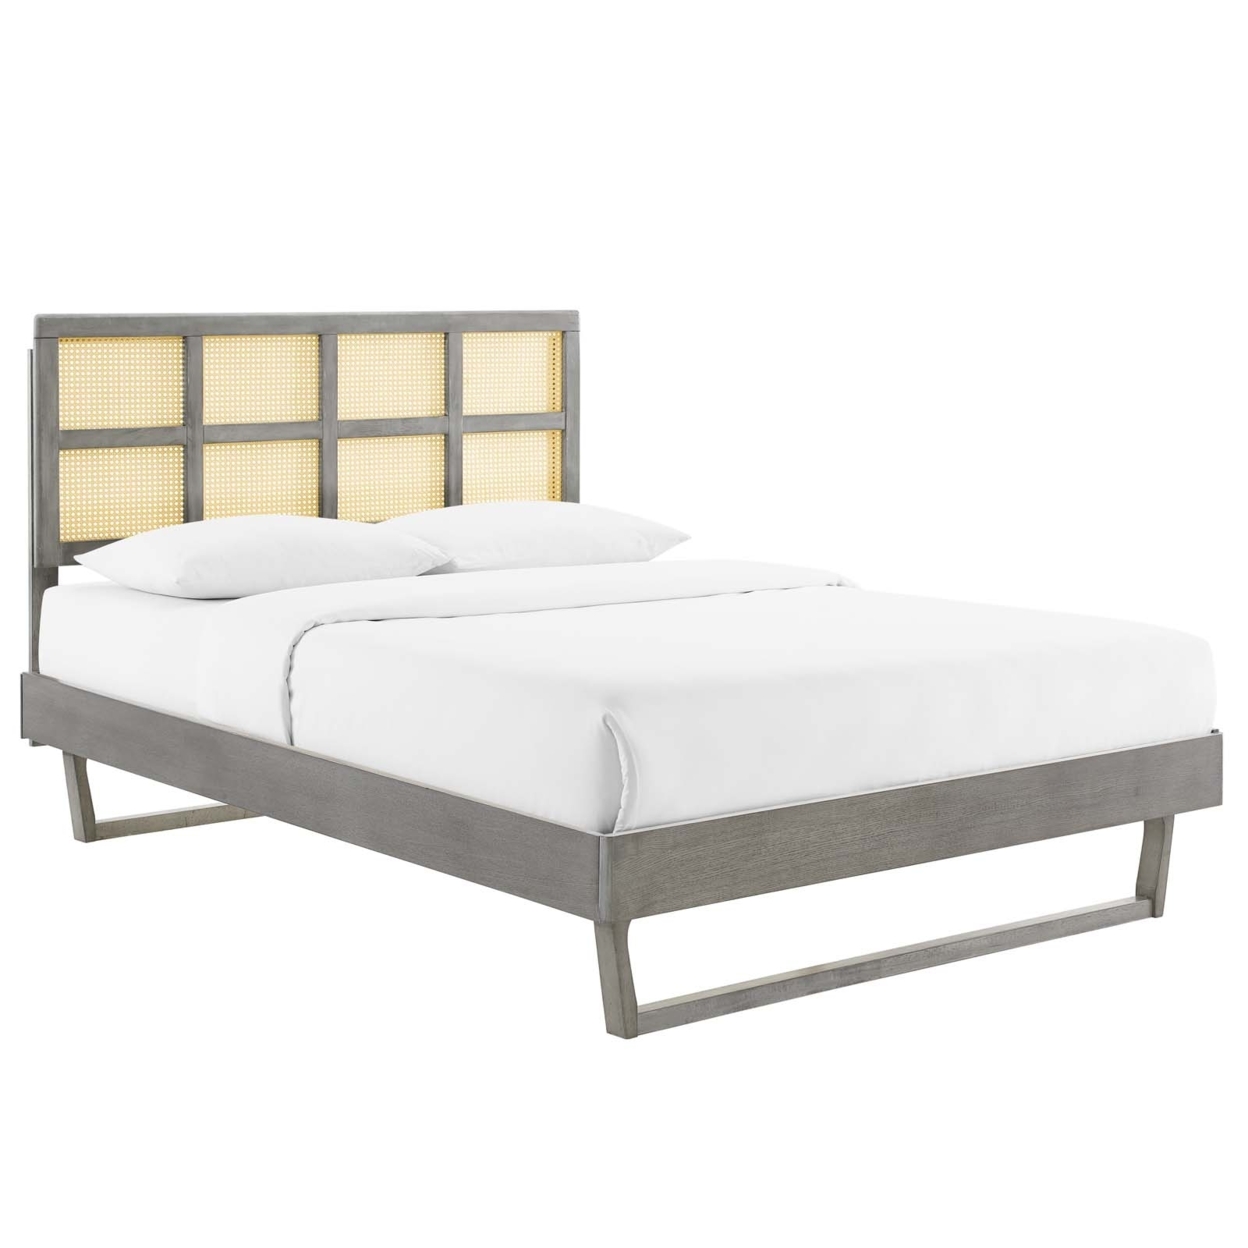 Sidney Cane And Wood Queen Platform Bed With Angular Legs, Gray